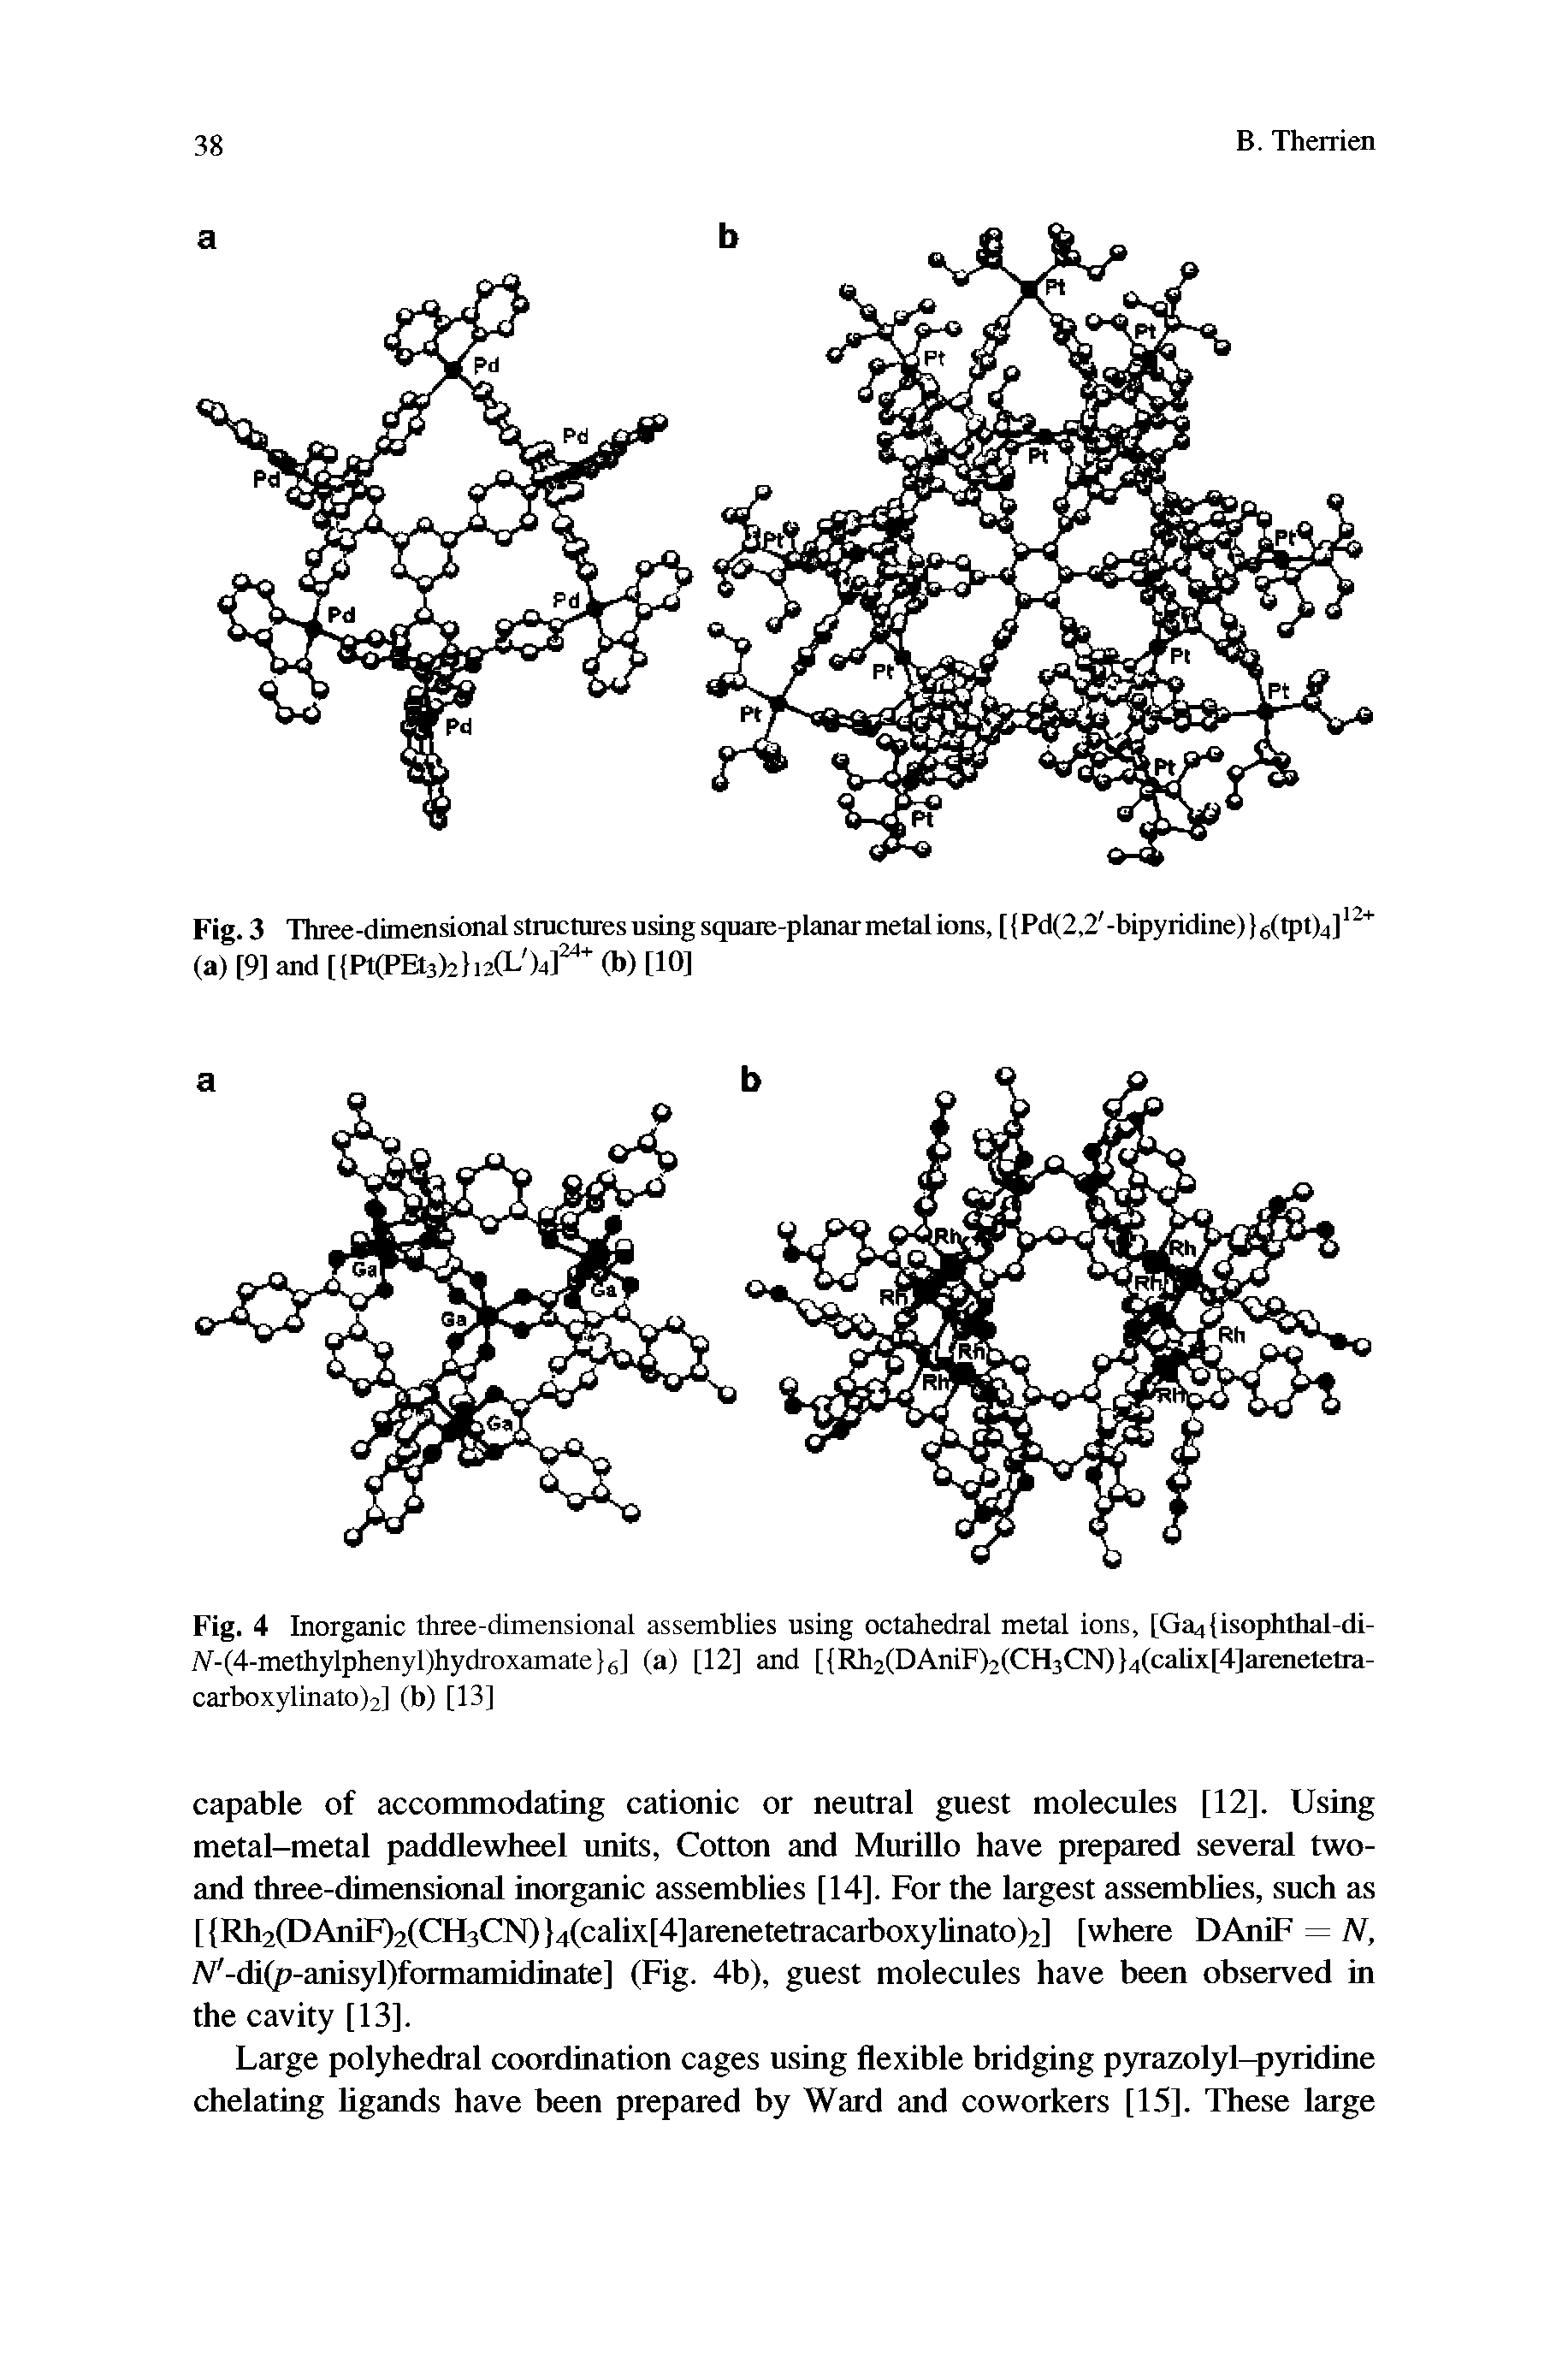 Fig. 4 Inorganic three-dimensional assemblies using octahedral metal ions, [Gadisophthal-di-iV-(4-methylphenyl)hydroxamate 6] (a) [12] and [ Rh2(DAniF)2(CH3CN) 4(calix[4]arenetetra-carboxylinato)2] (b) [13]...